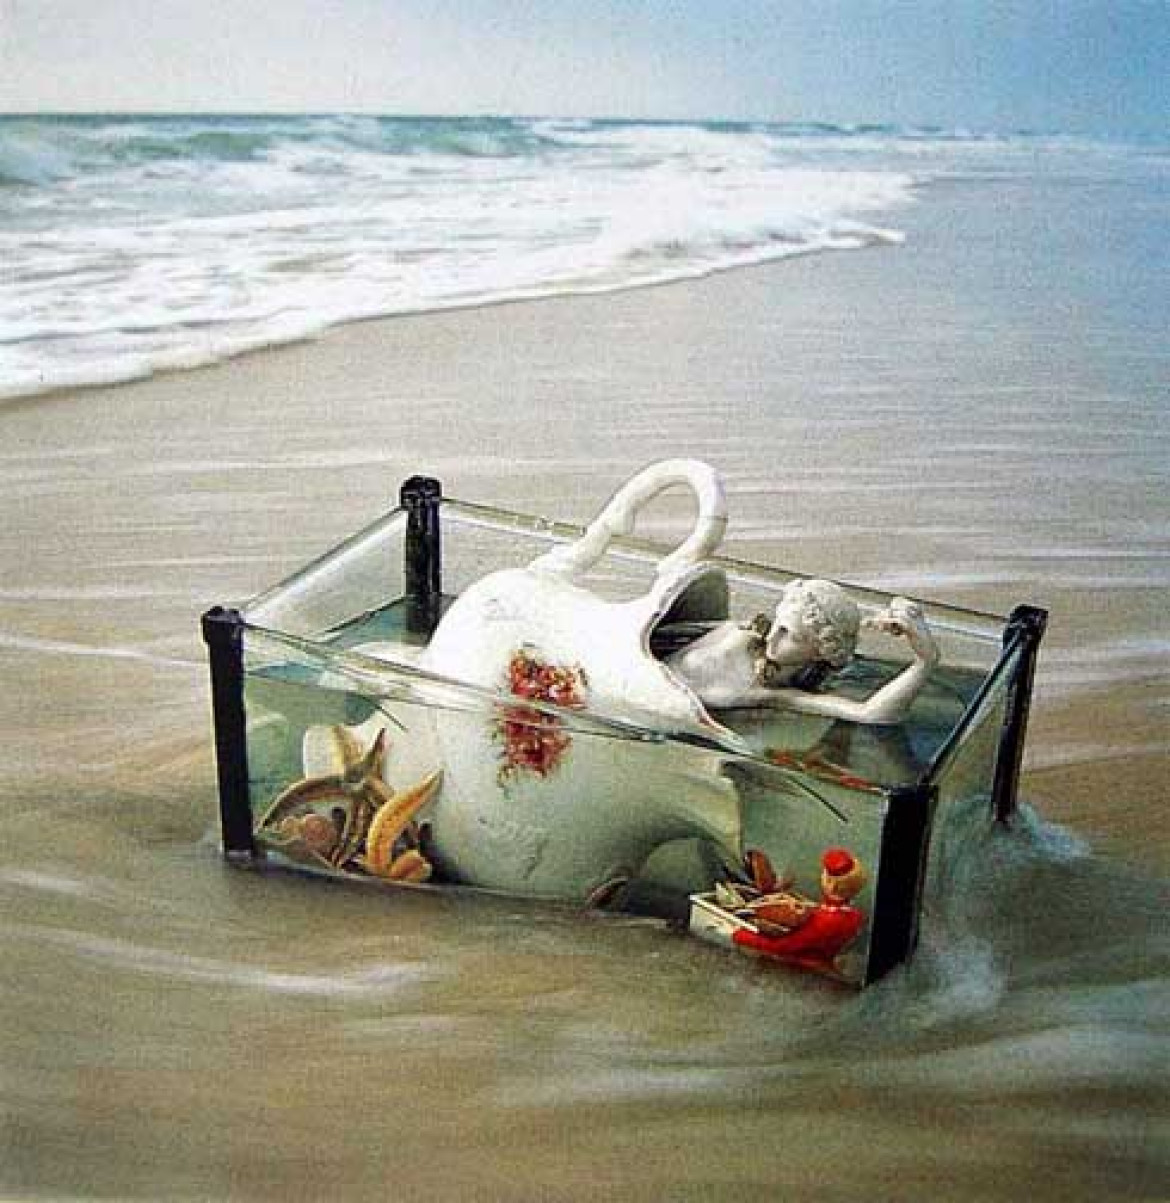 Fot. Arthur Tress z cyklu Fish Tank Sonata PART IV: THE LURES OF LOVE A FINE AND FROTHY DAY UPON A TIMELESS STRAND A GODDESS WAS BLOWN BY HUMID WINDS ONWARD TO THE LAND